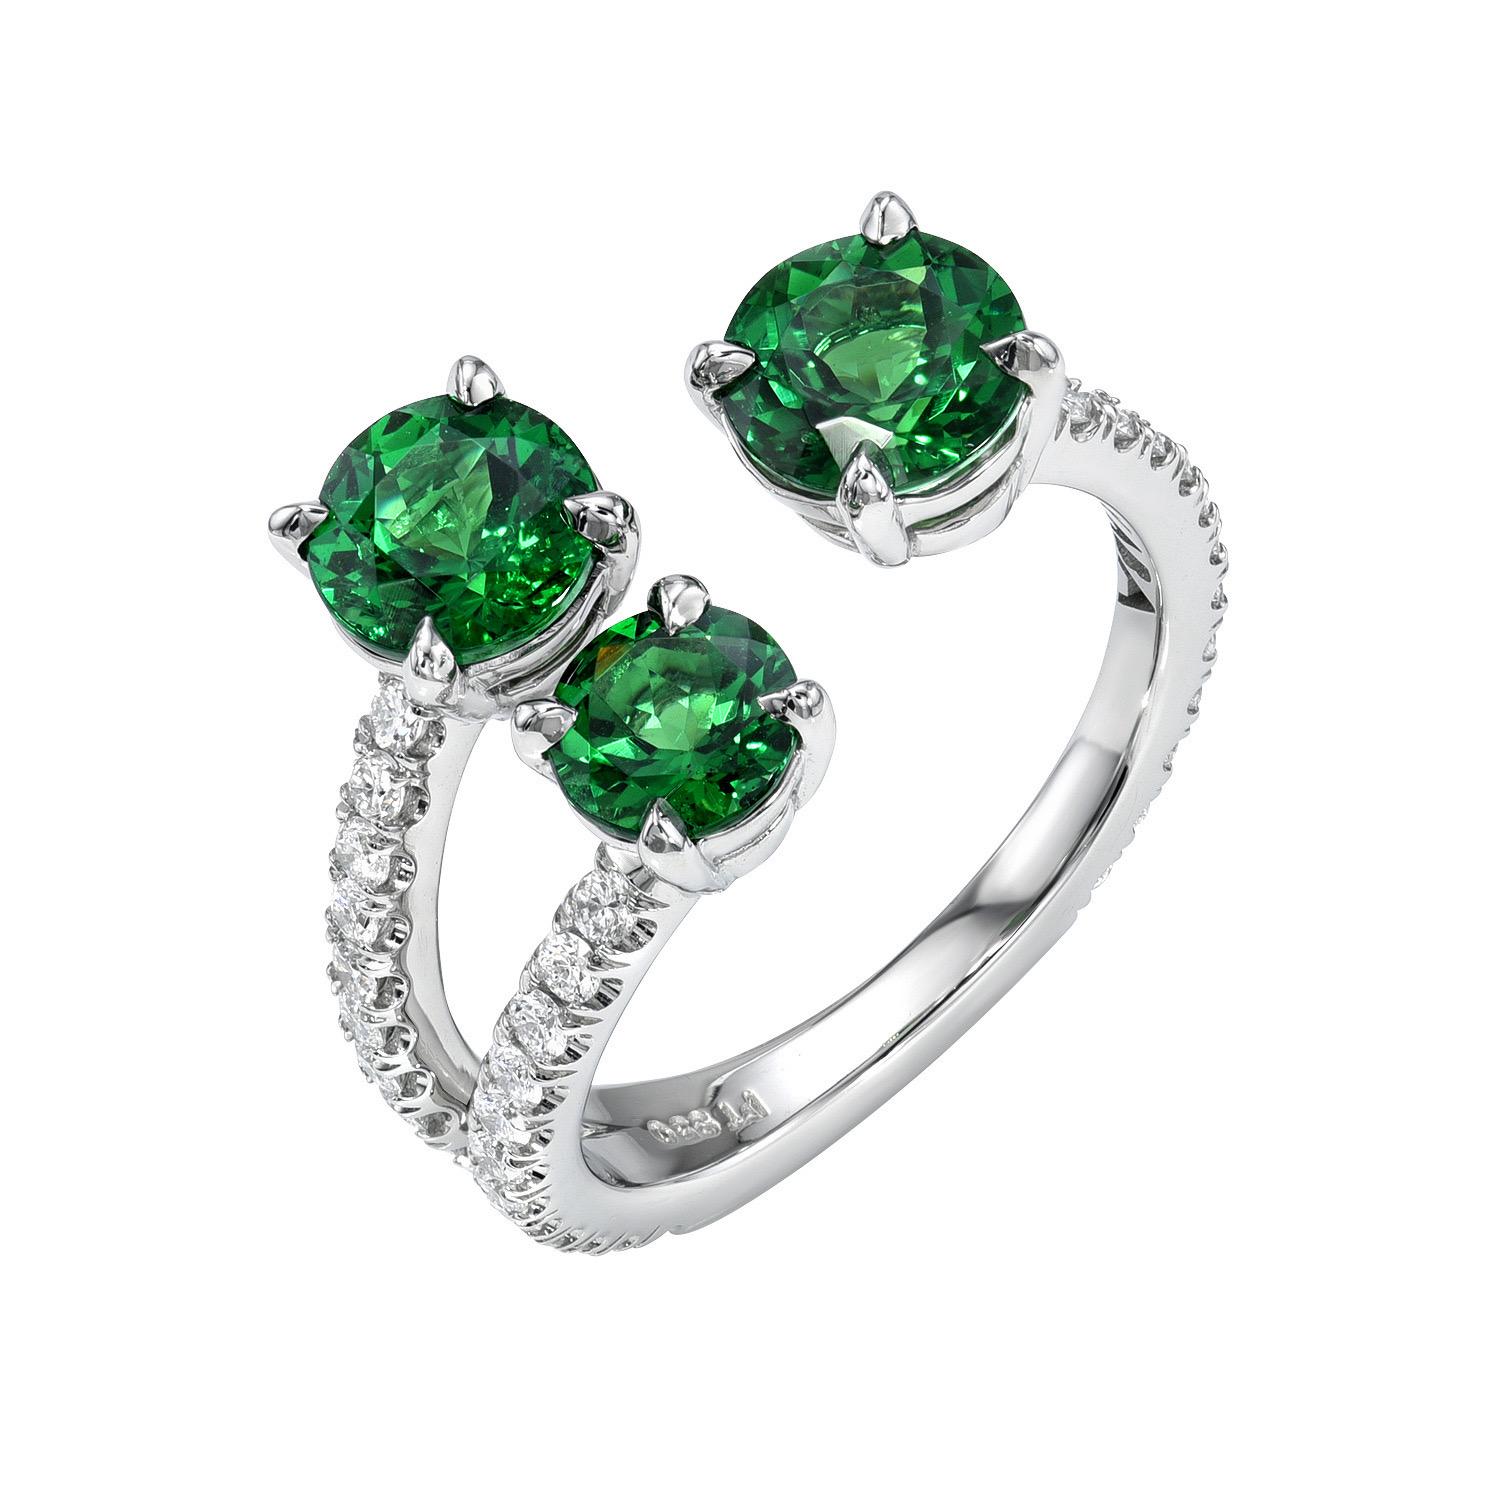 Remarkable platinum ring, set with a total of 2.12 carat Tsavorite Garnet rounds, and decorated with a total of 0.51 carat round brilliant collection diamonds.
Ring size 6. Resizing is complementary upon request.
Crafted by extremely skilled hands